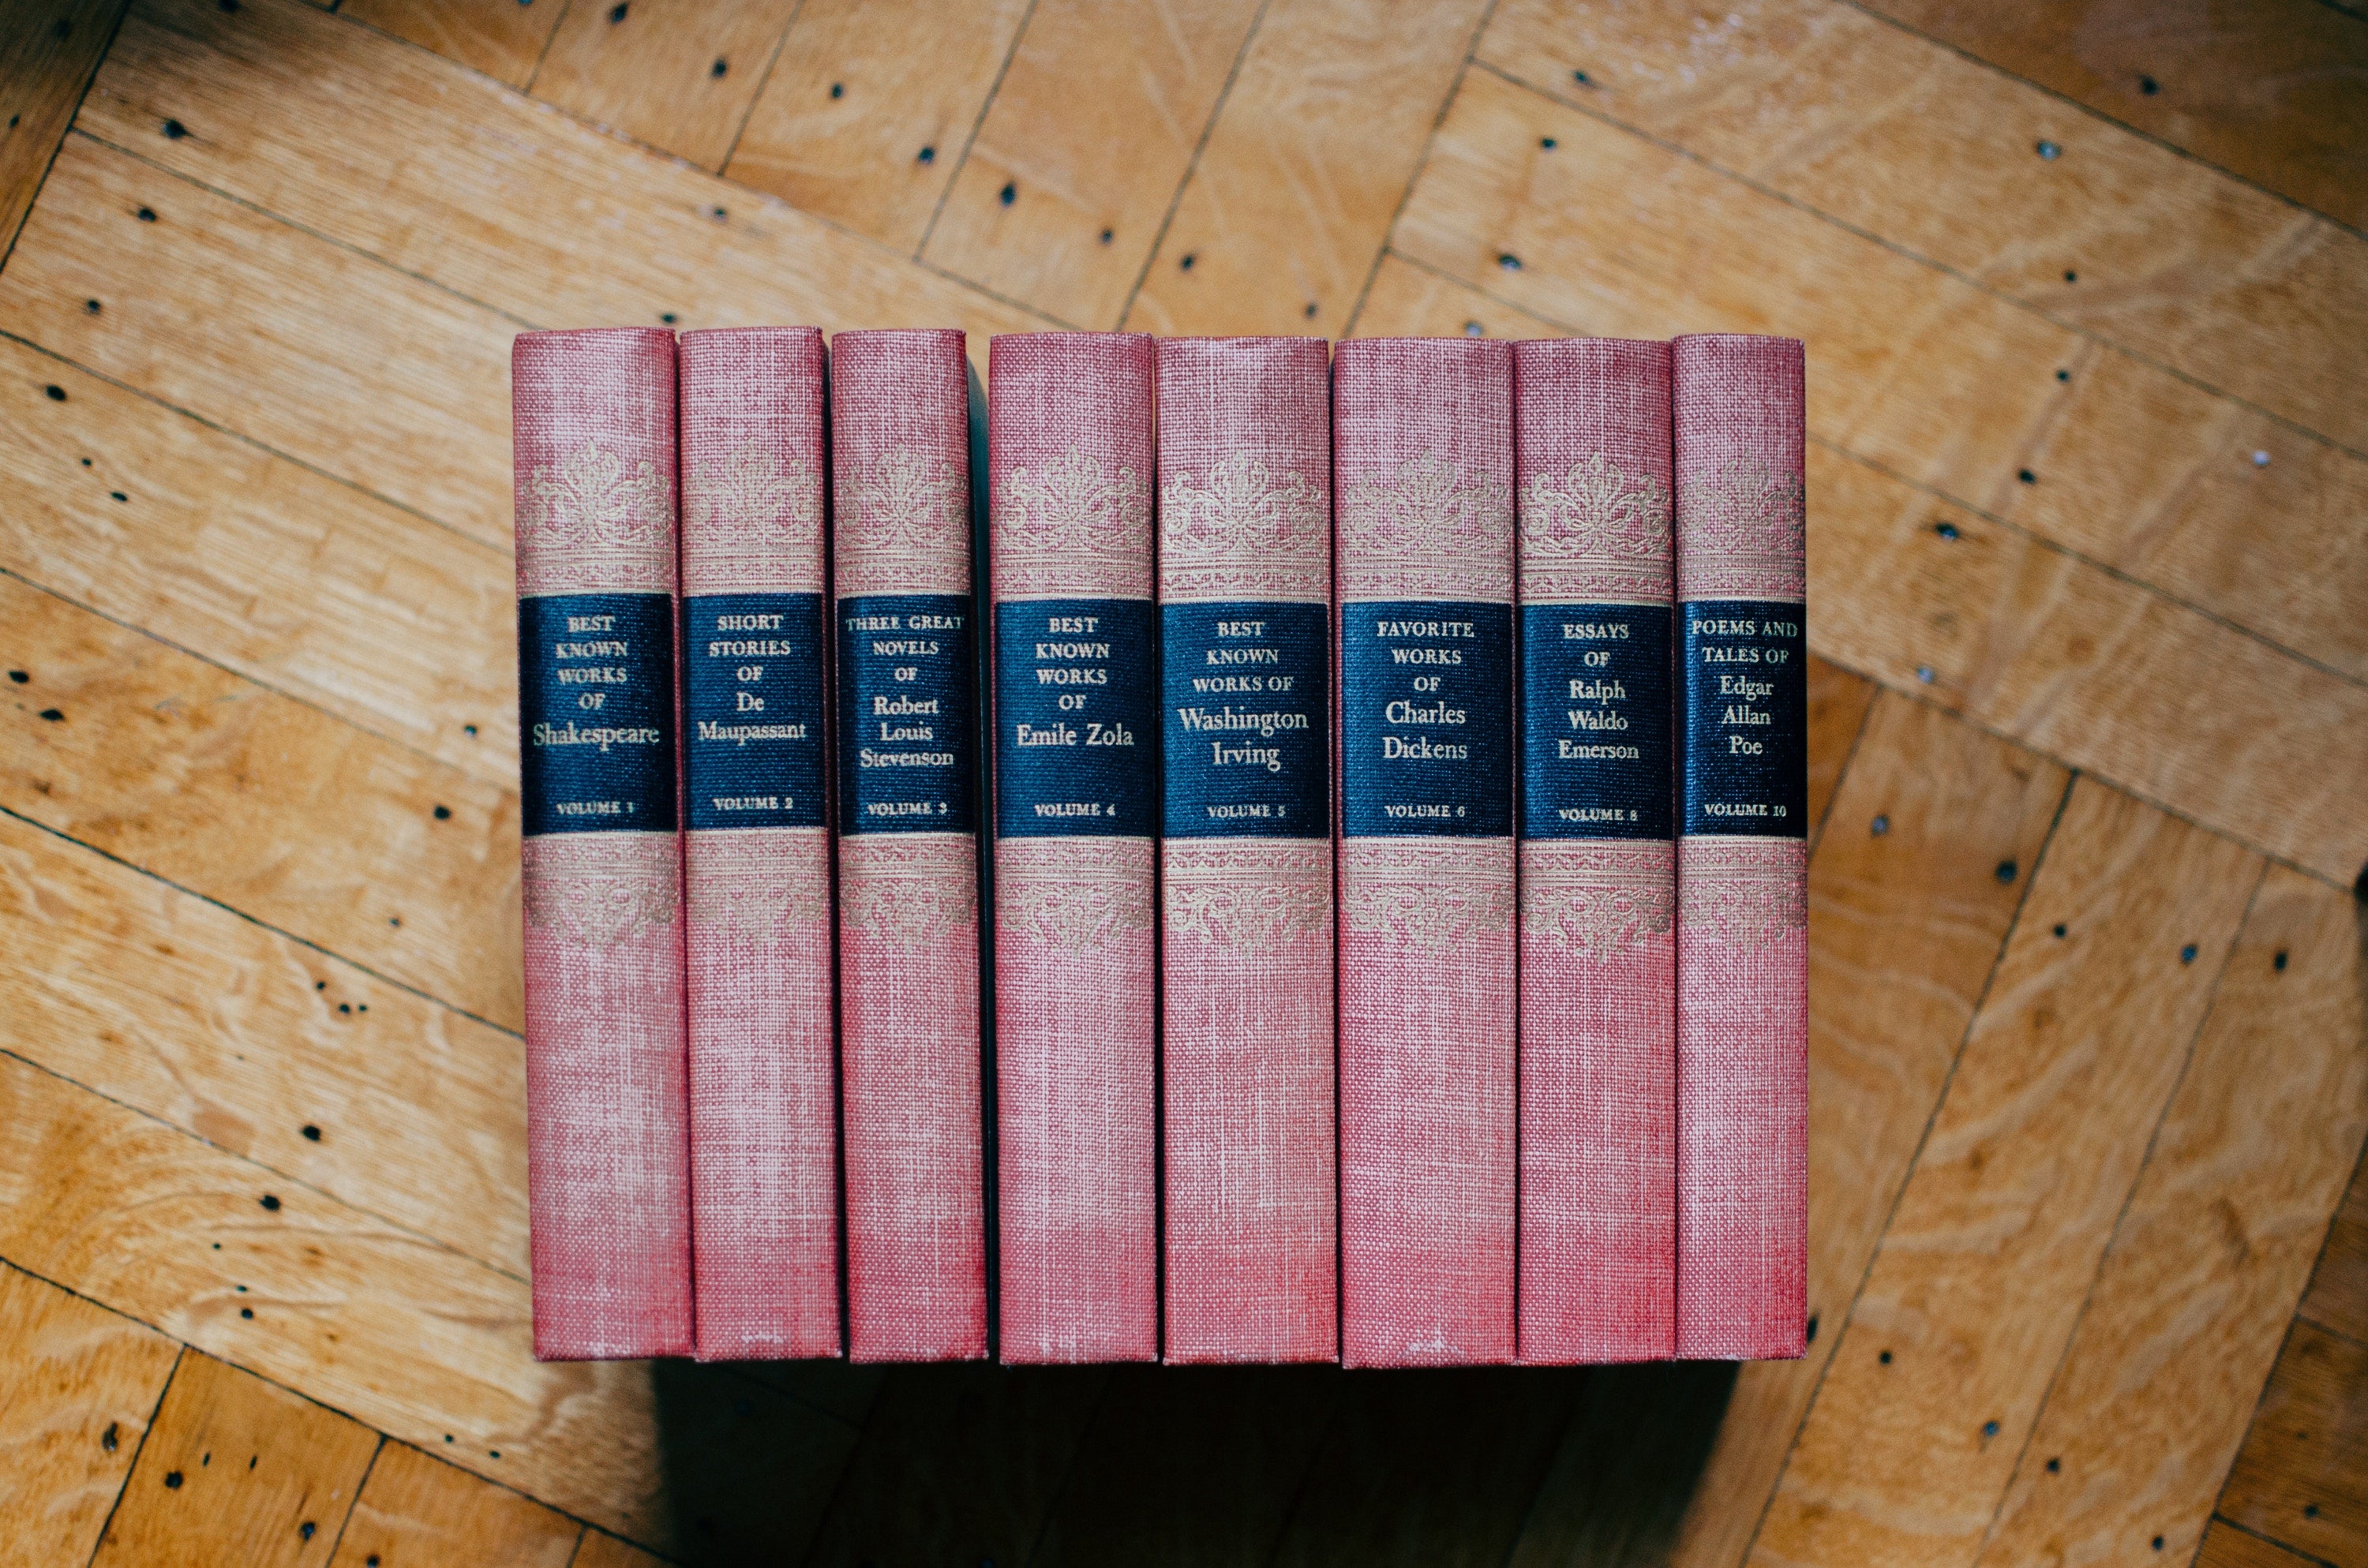 Red and worn book spines